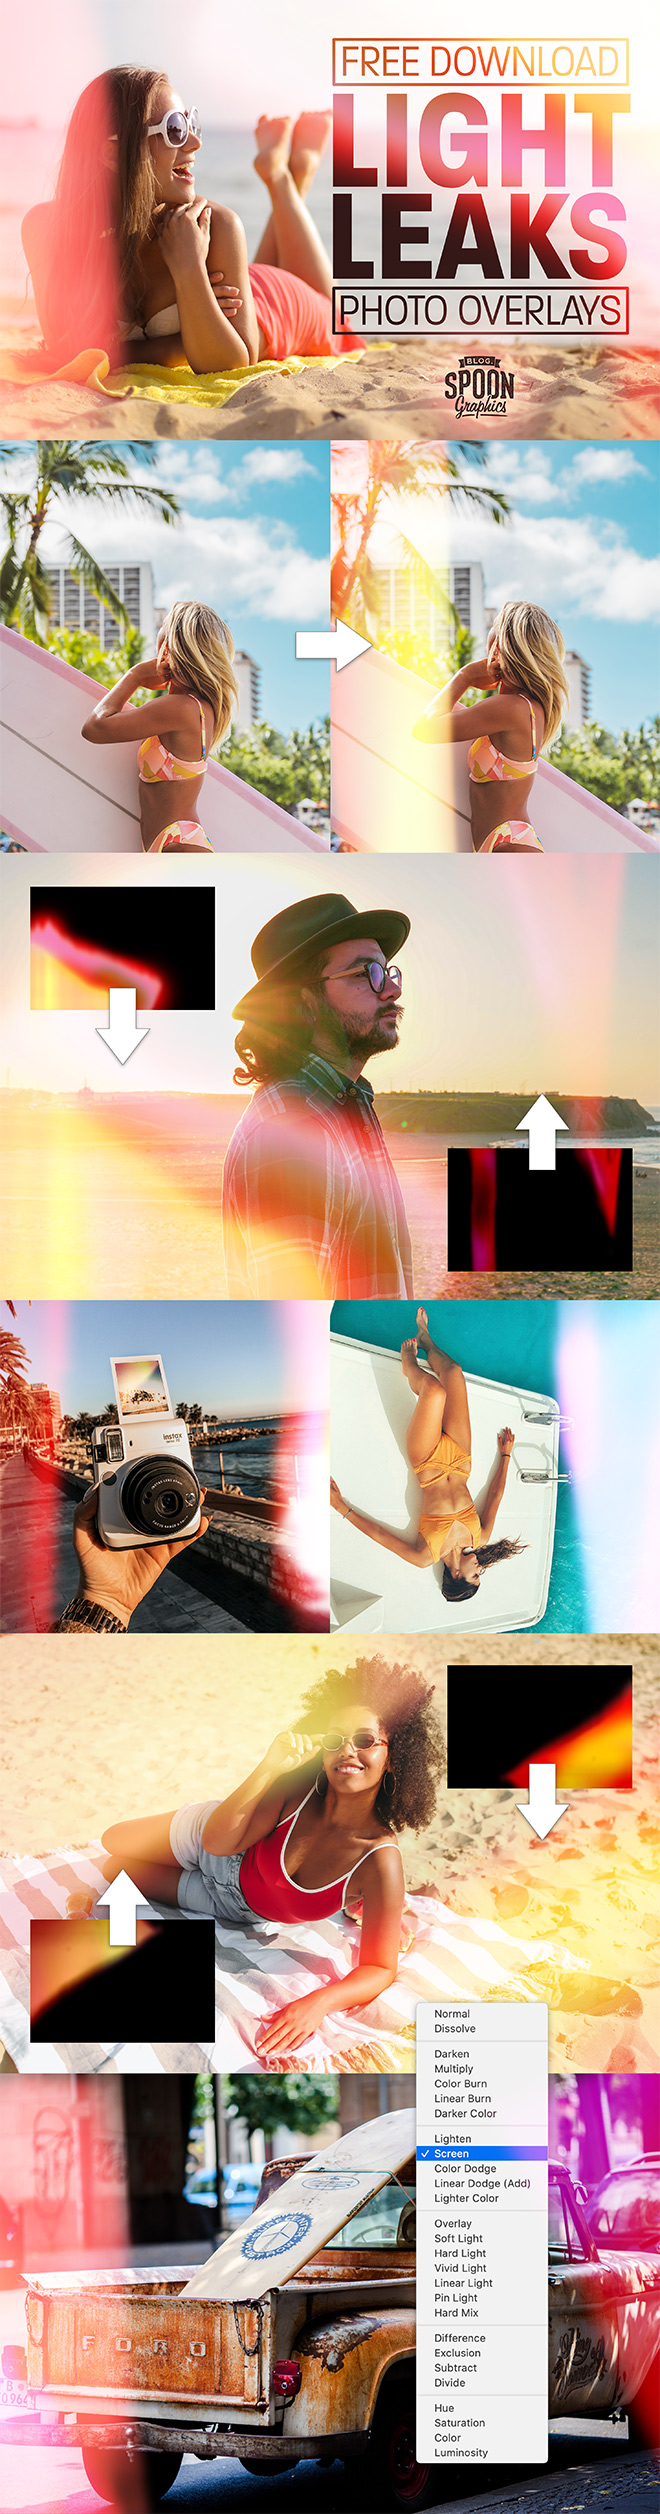 Download My Free Light Leaks Photo Overlays to Add Retro Effects to Your Photos